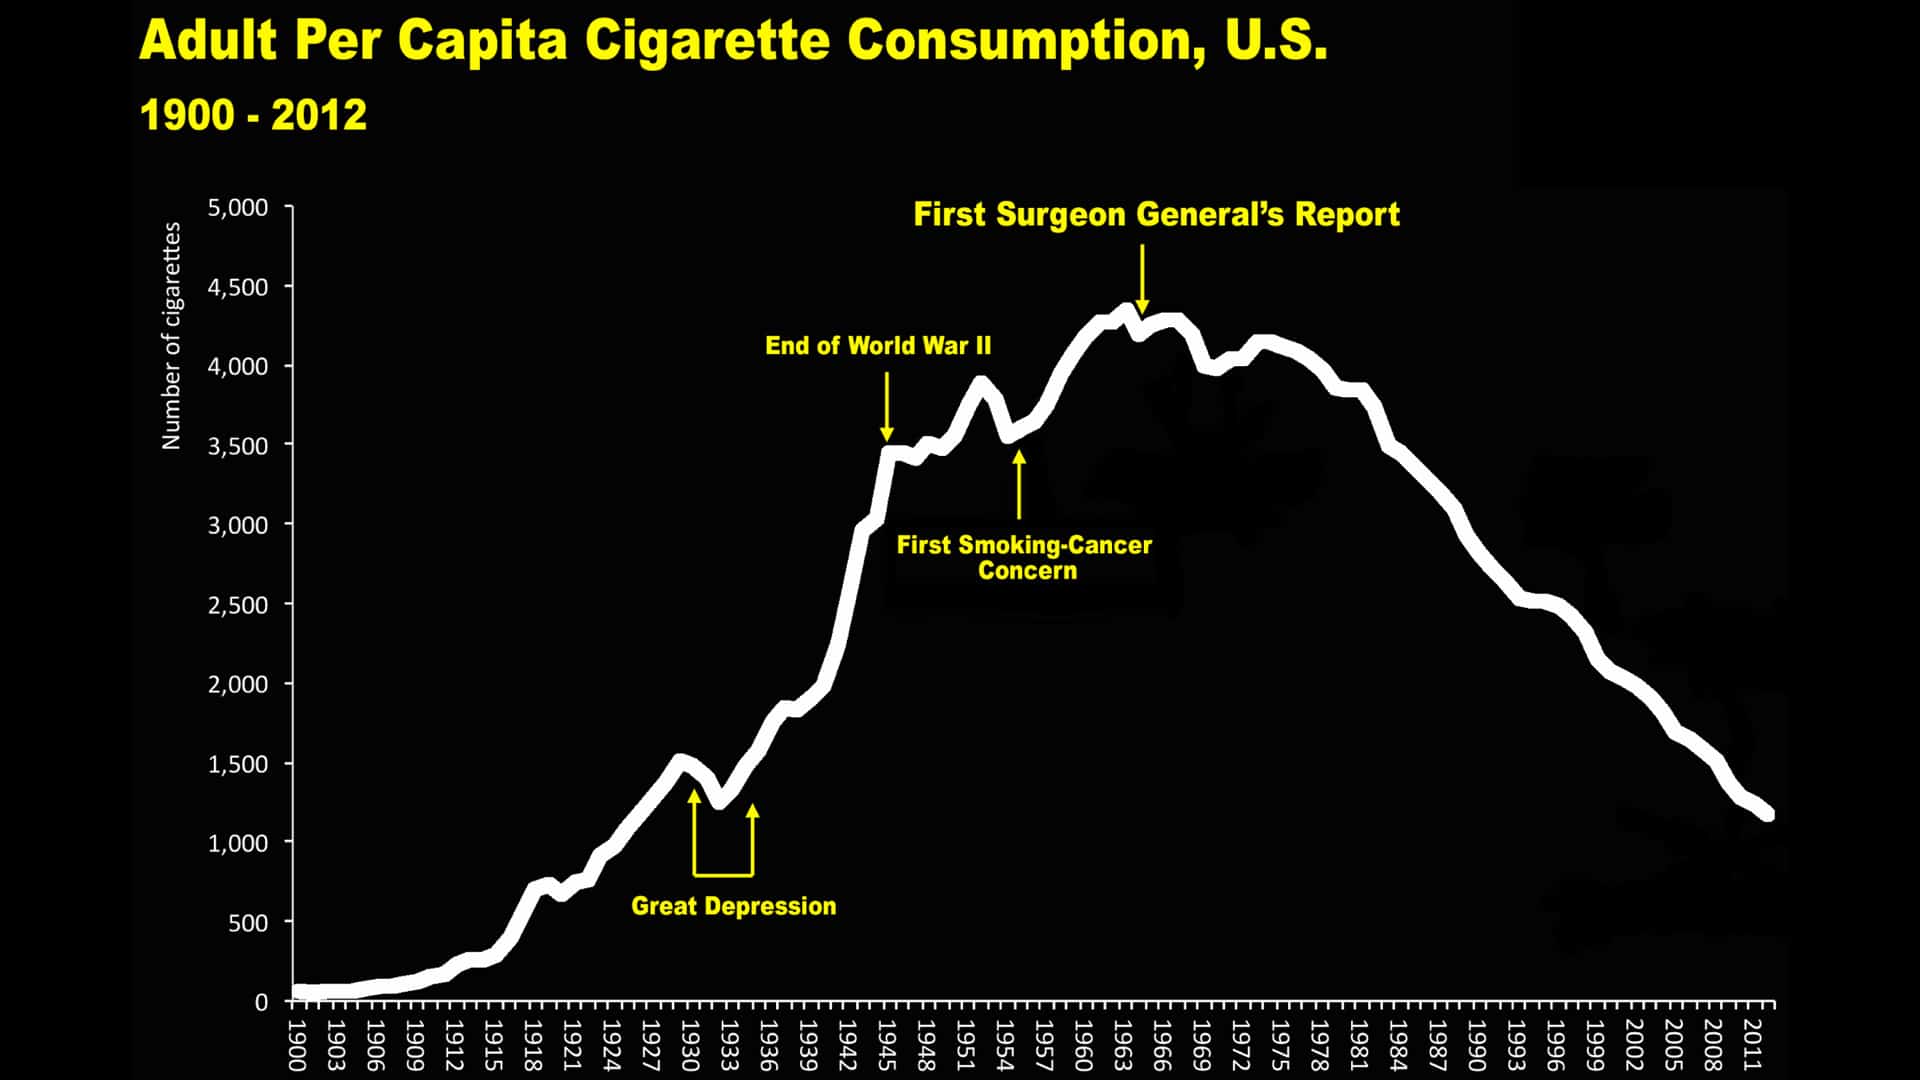 American Medical Association Complicity with Big Tobacco